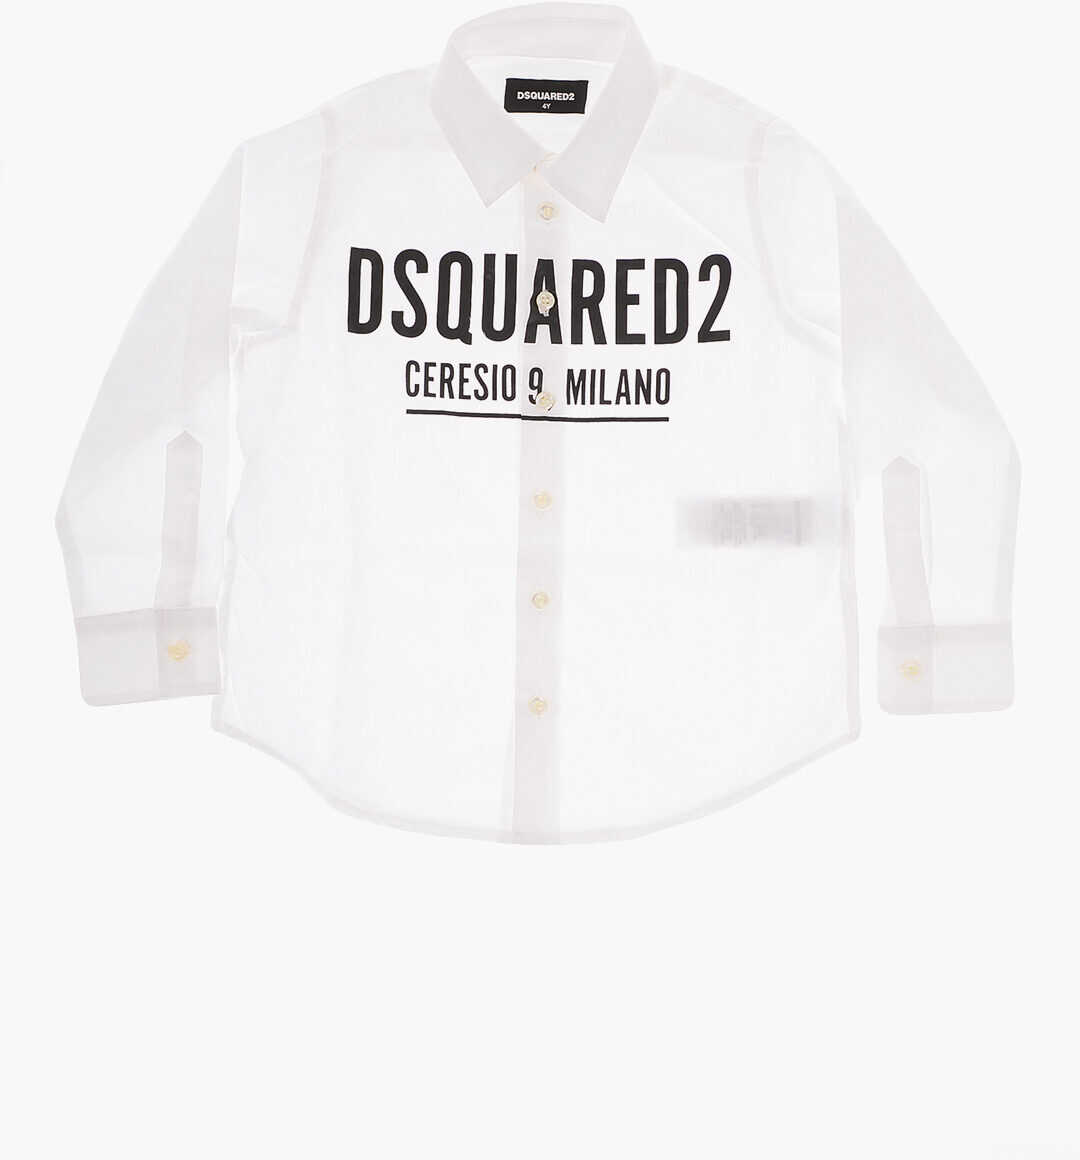 DSQUARED2 Shirt Ceresio 9 Relax With Contrasting Printed And Classic C Black & White